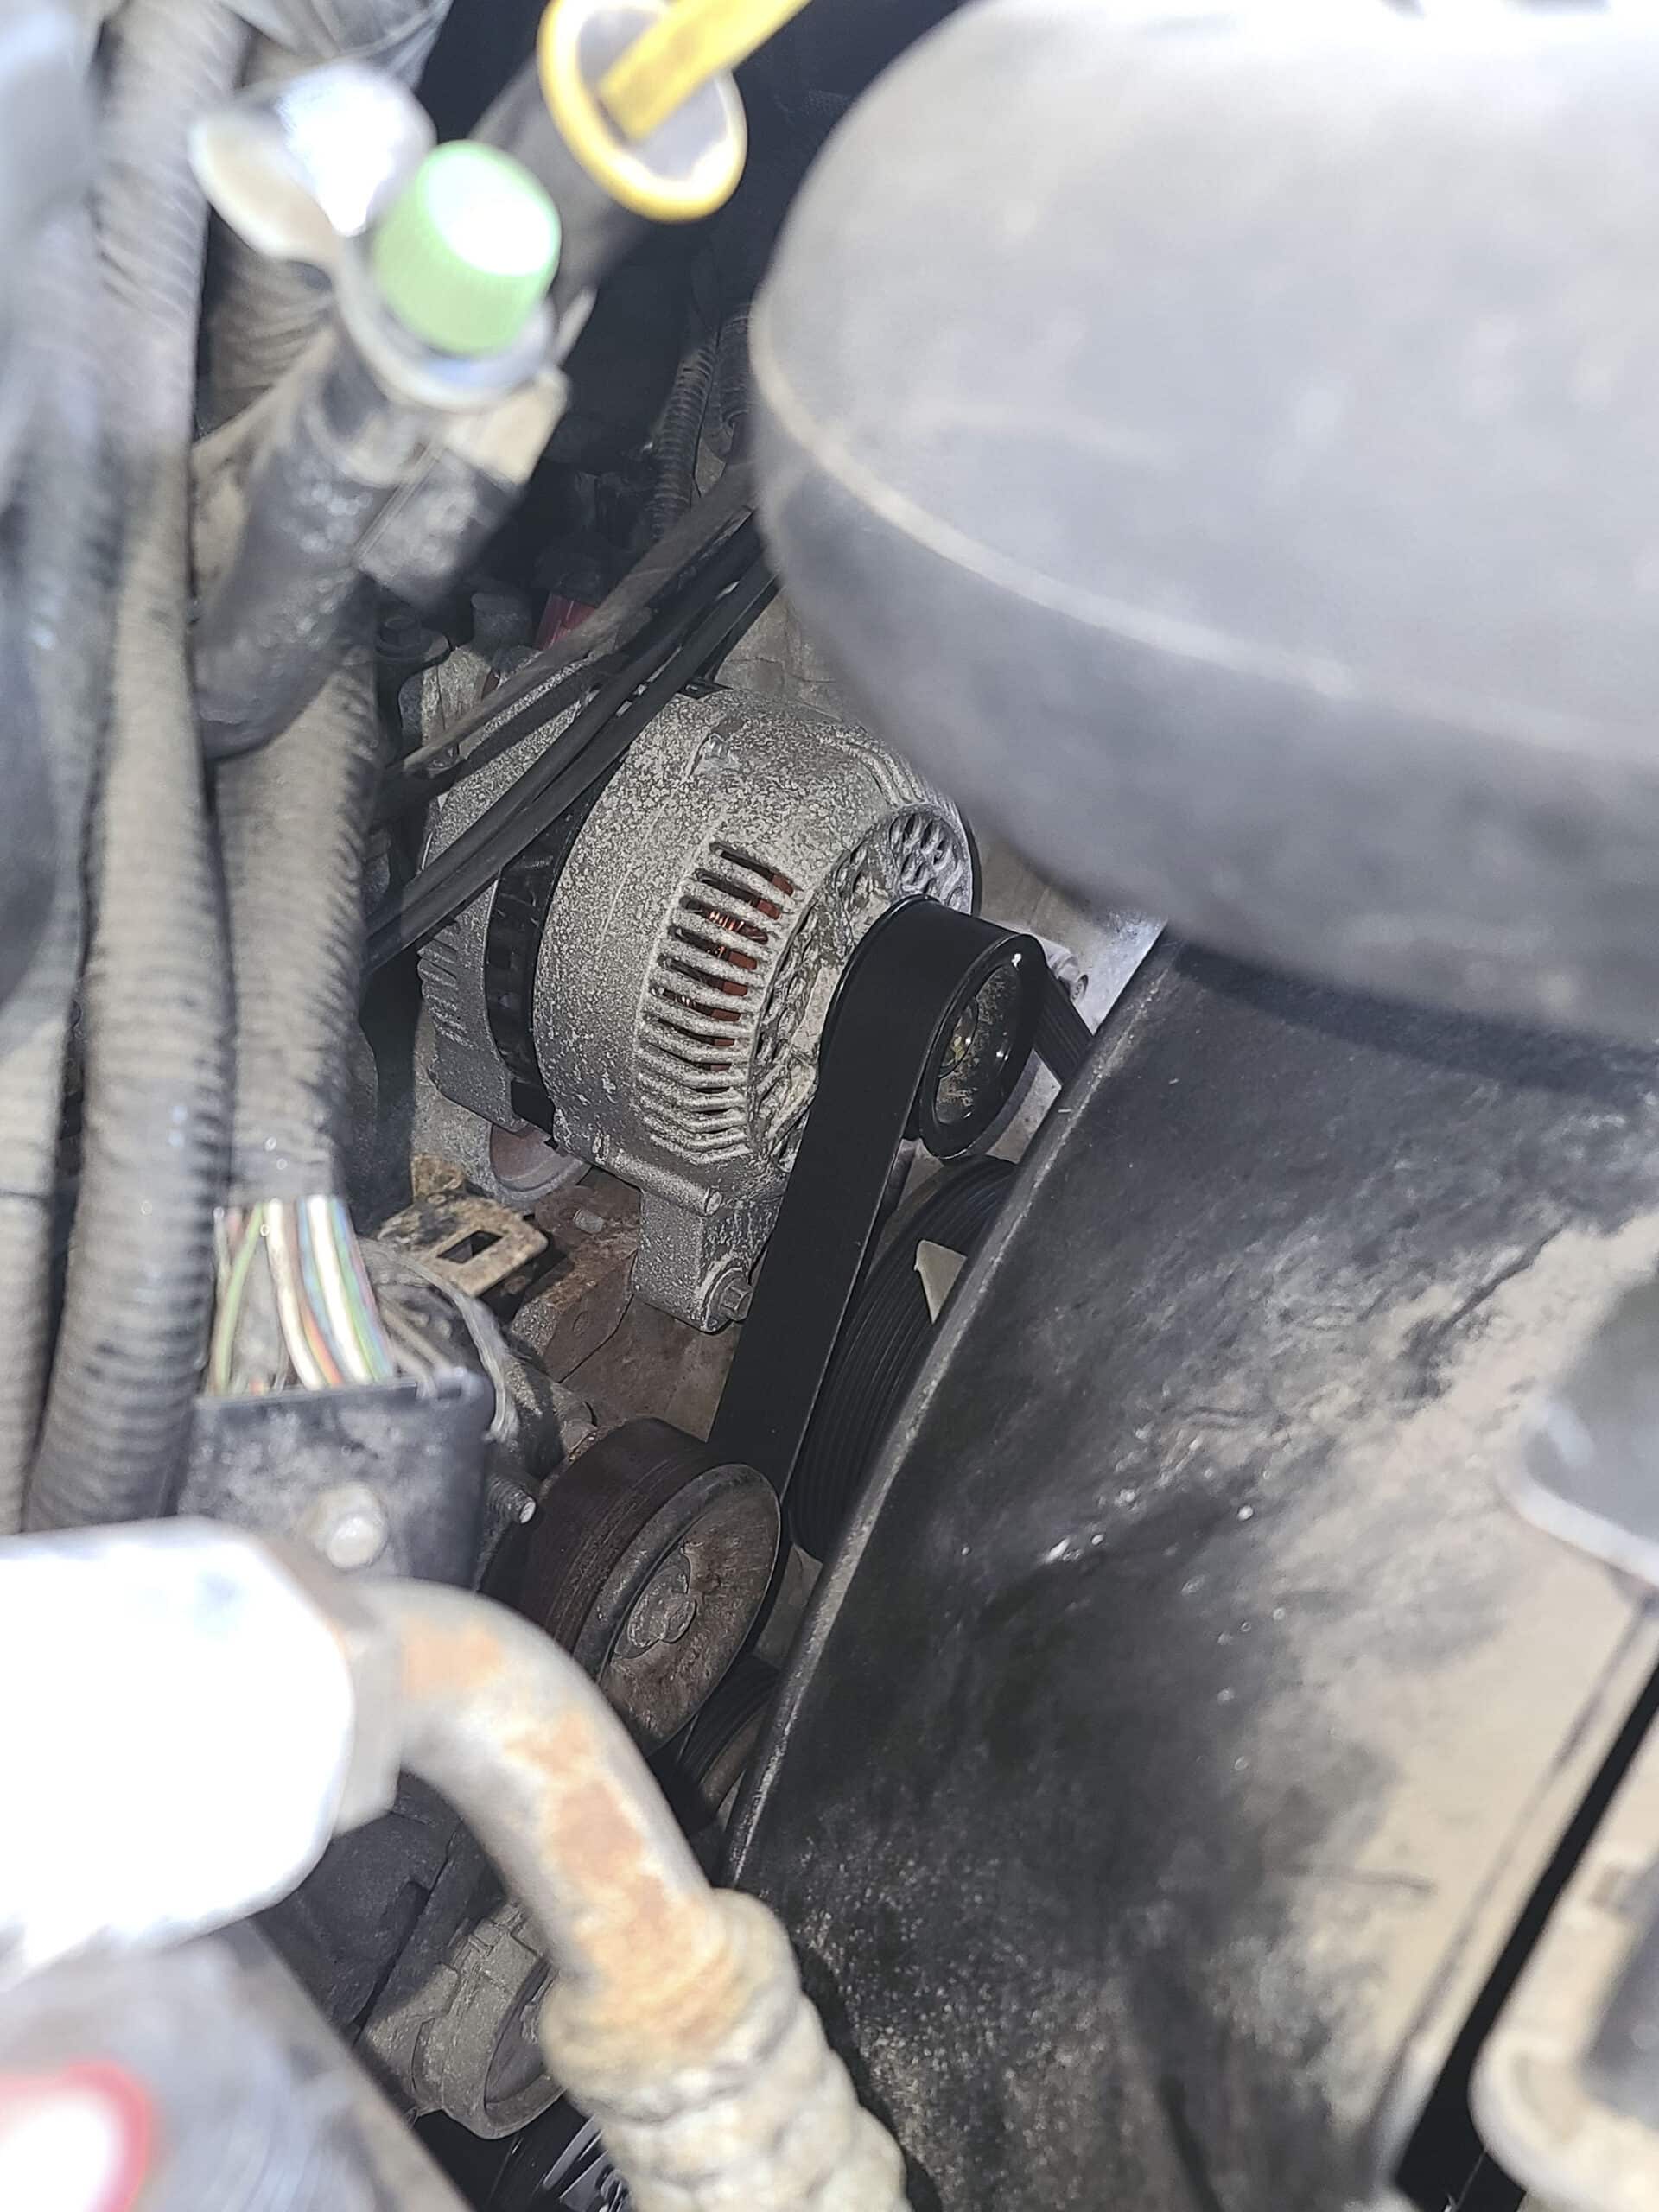 Under the hood of a motorhome, focused on the gray alternator with a black belt.